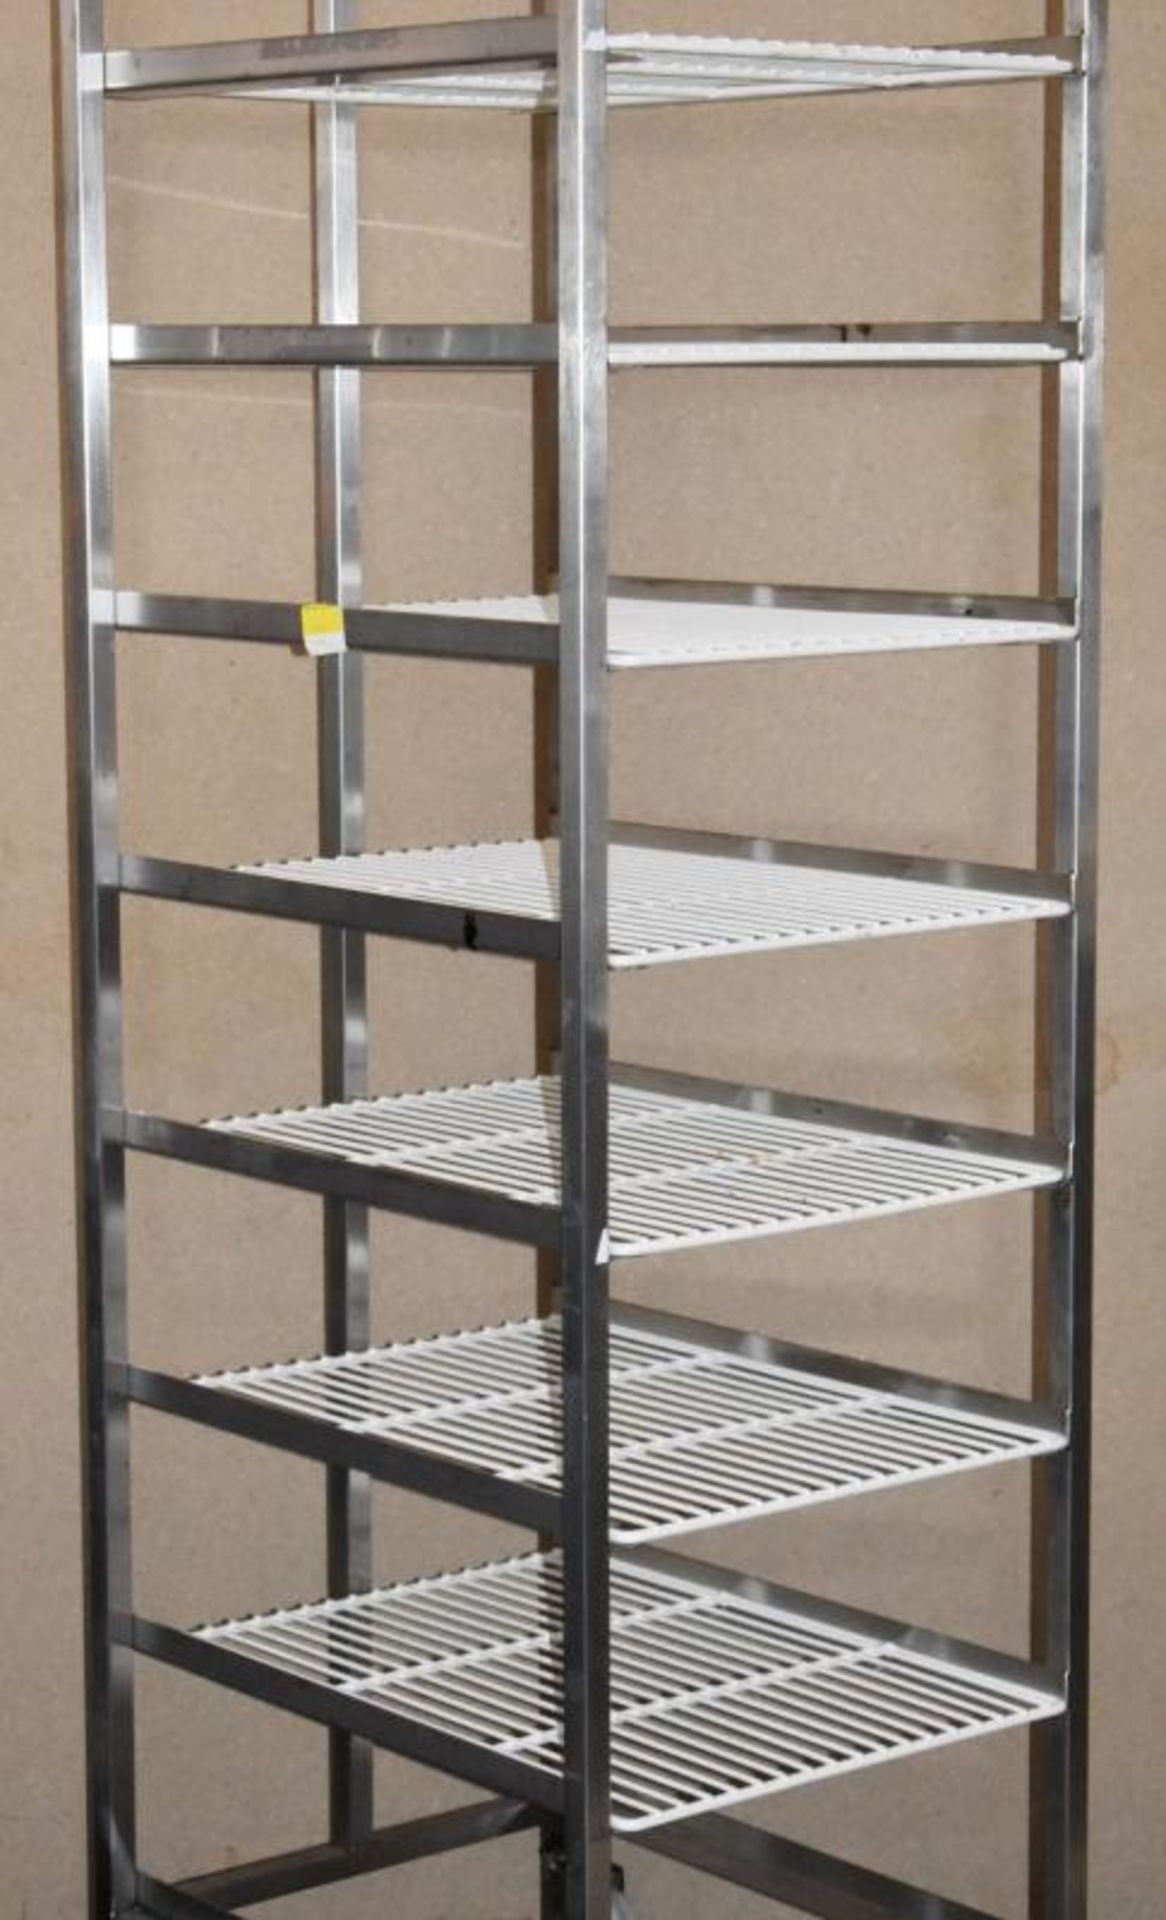 1 x Stainless Steel 8 Tier Mobile Shelf Unit For Commercial Kitchens With White Coated Wire Shelves - Image 7 of 11